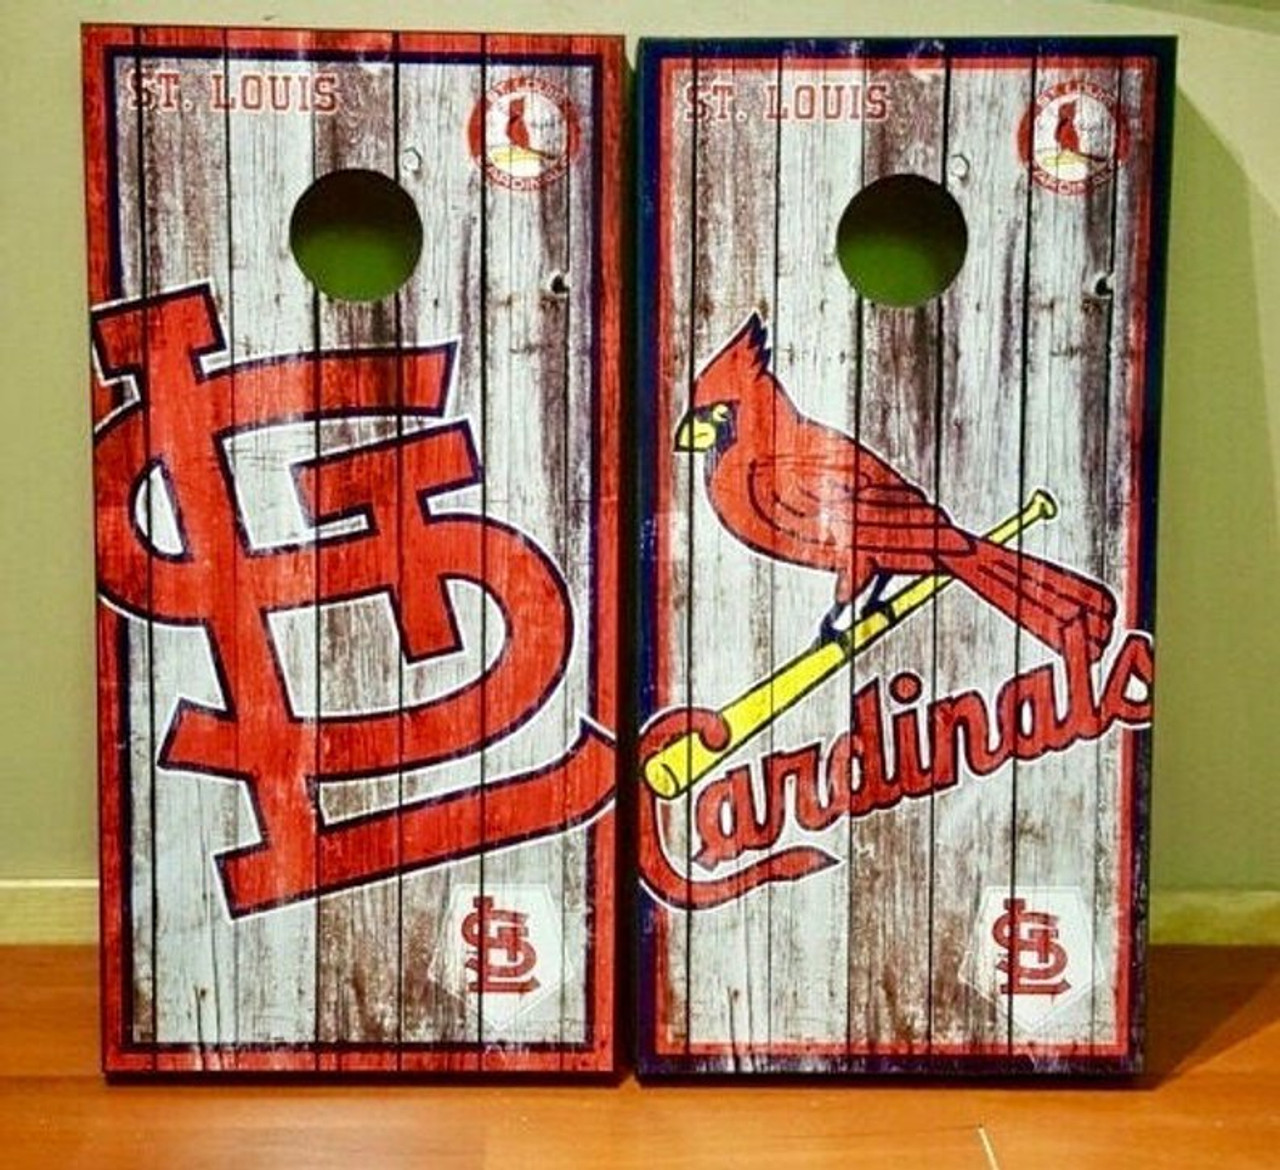 St. Louis Cardinals and Blues Cornhole Set with Bags - Custom